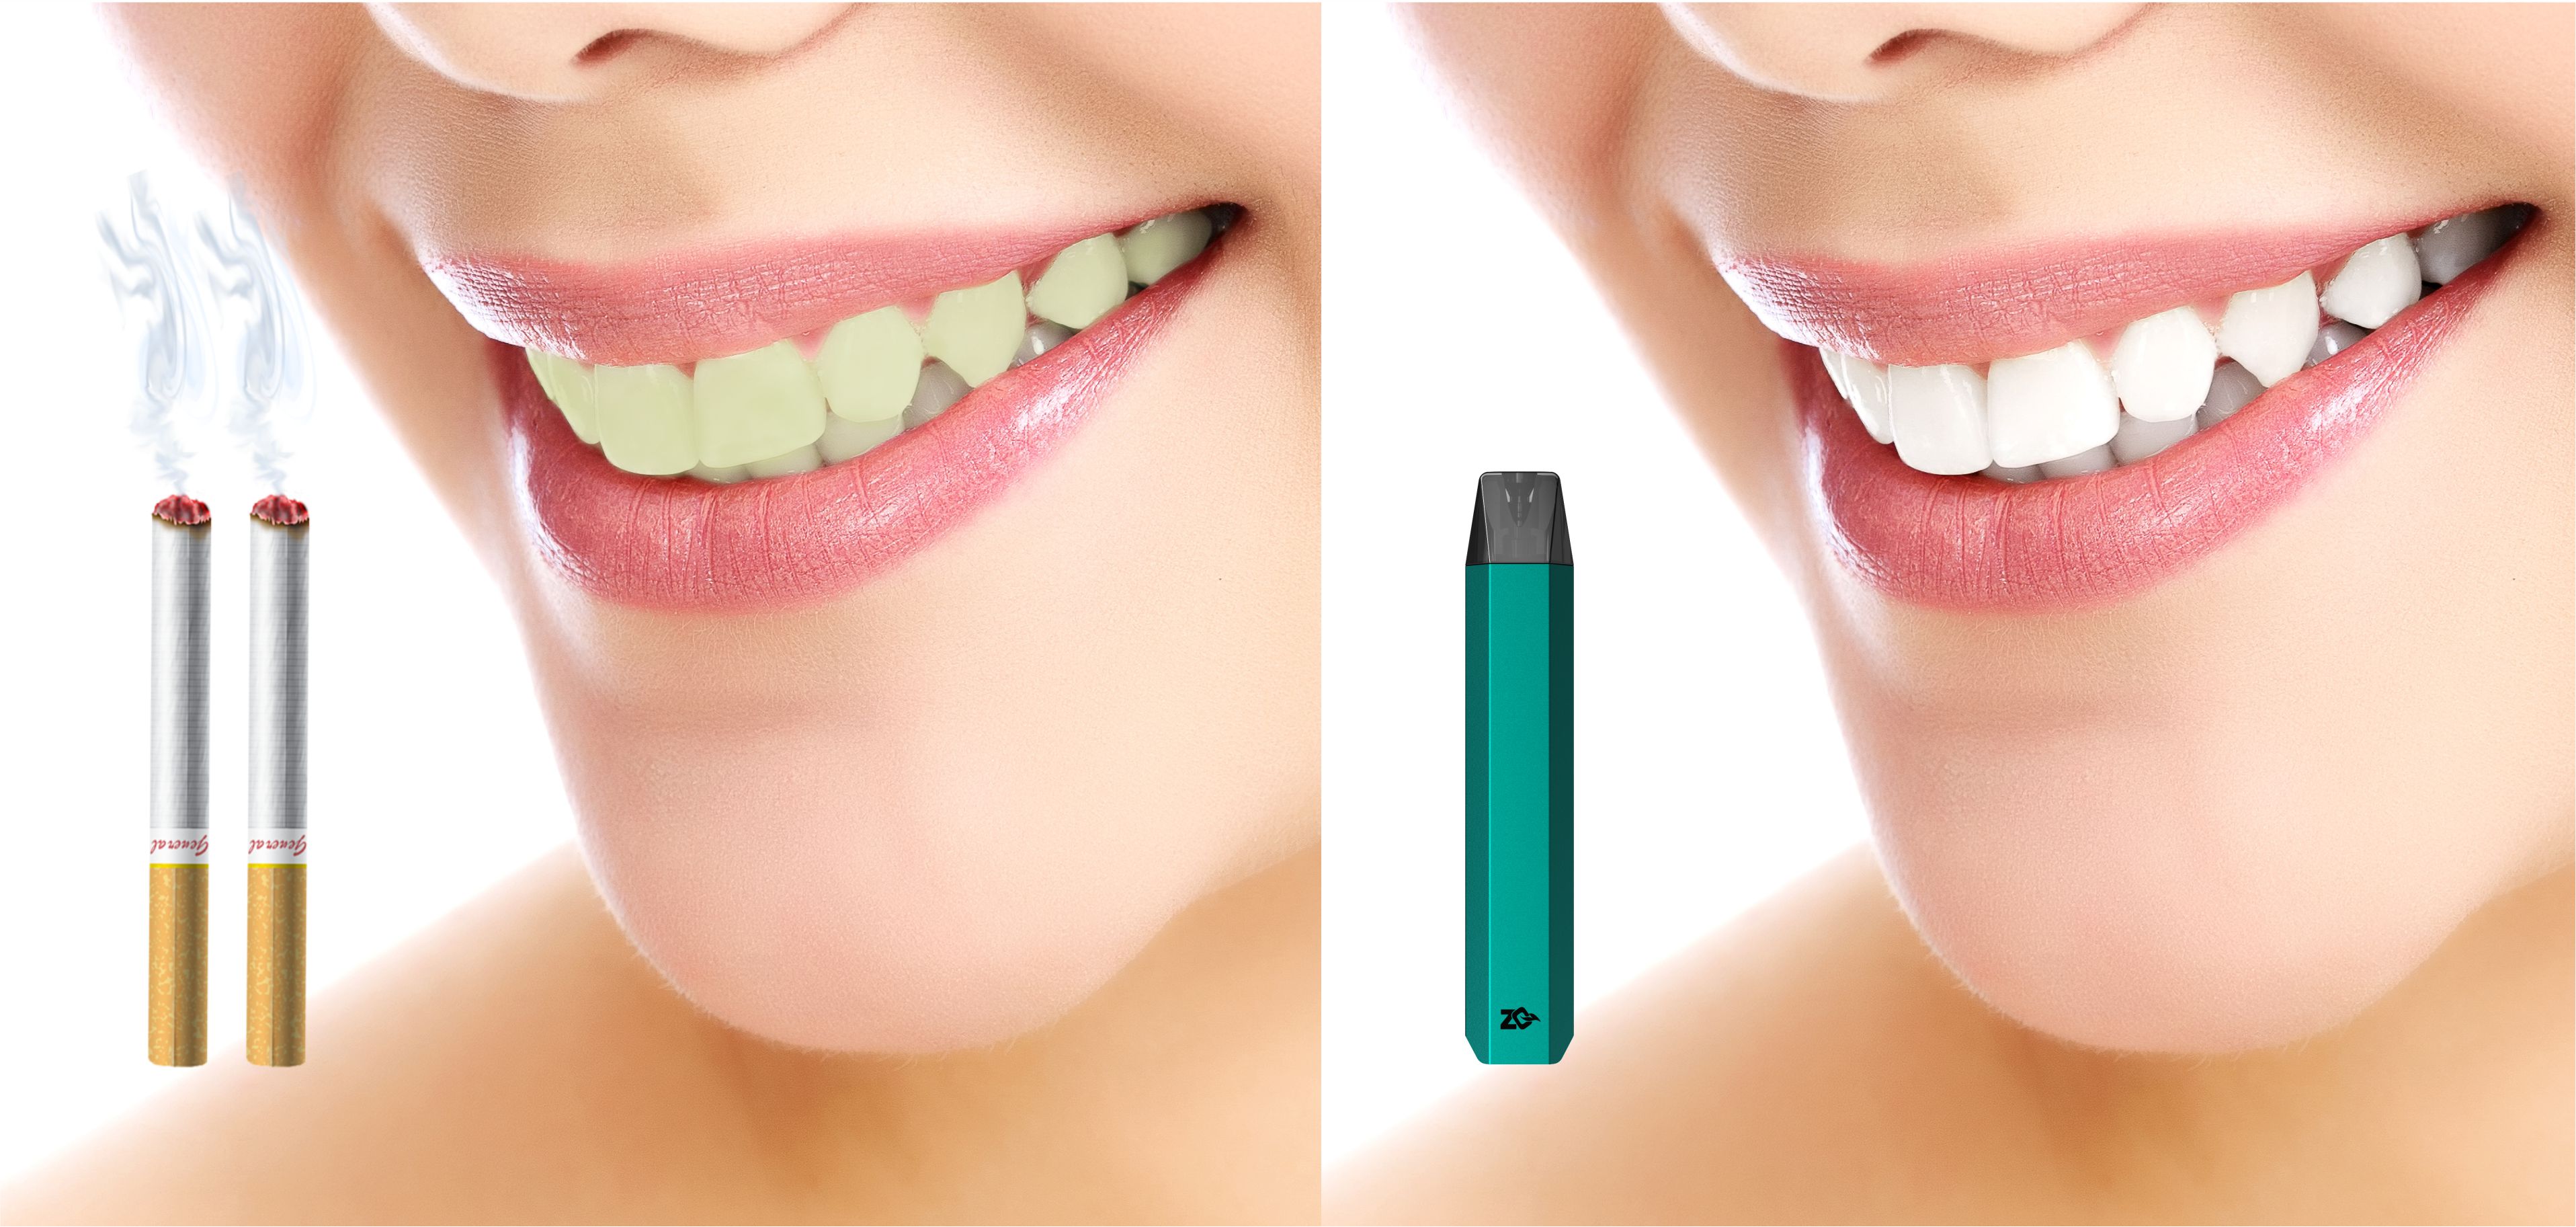 Does Vaping Stain Your Teeth?  